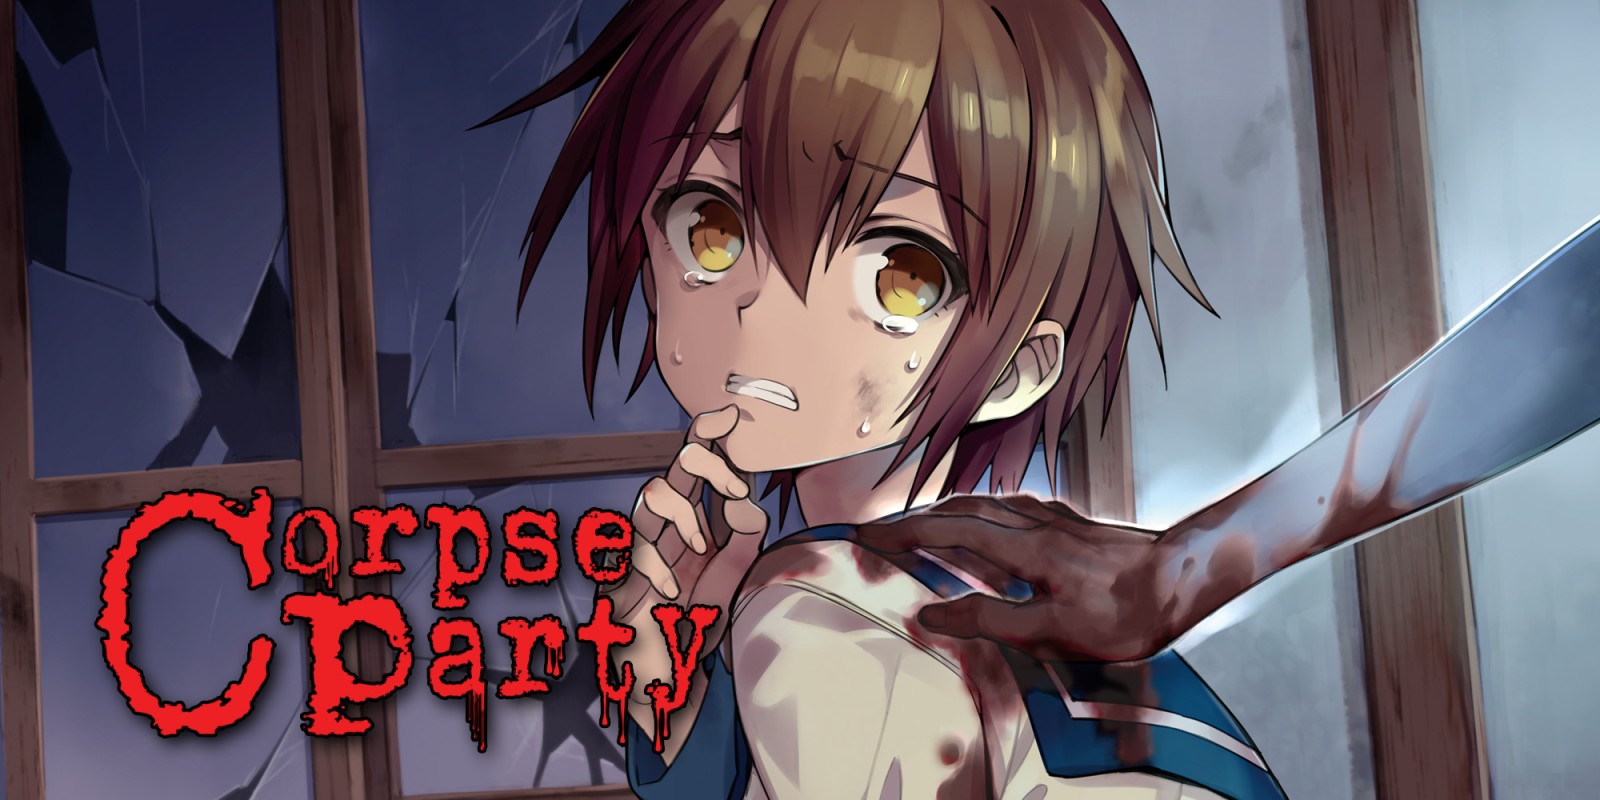 corpse party anime torrent 1080p